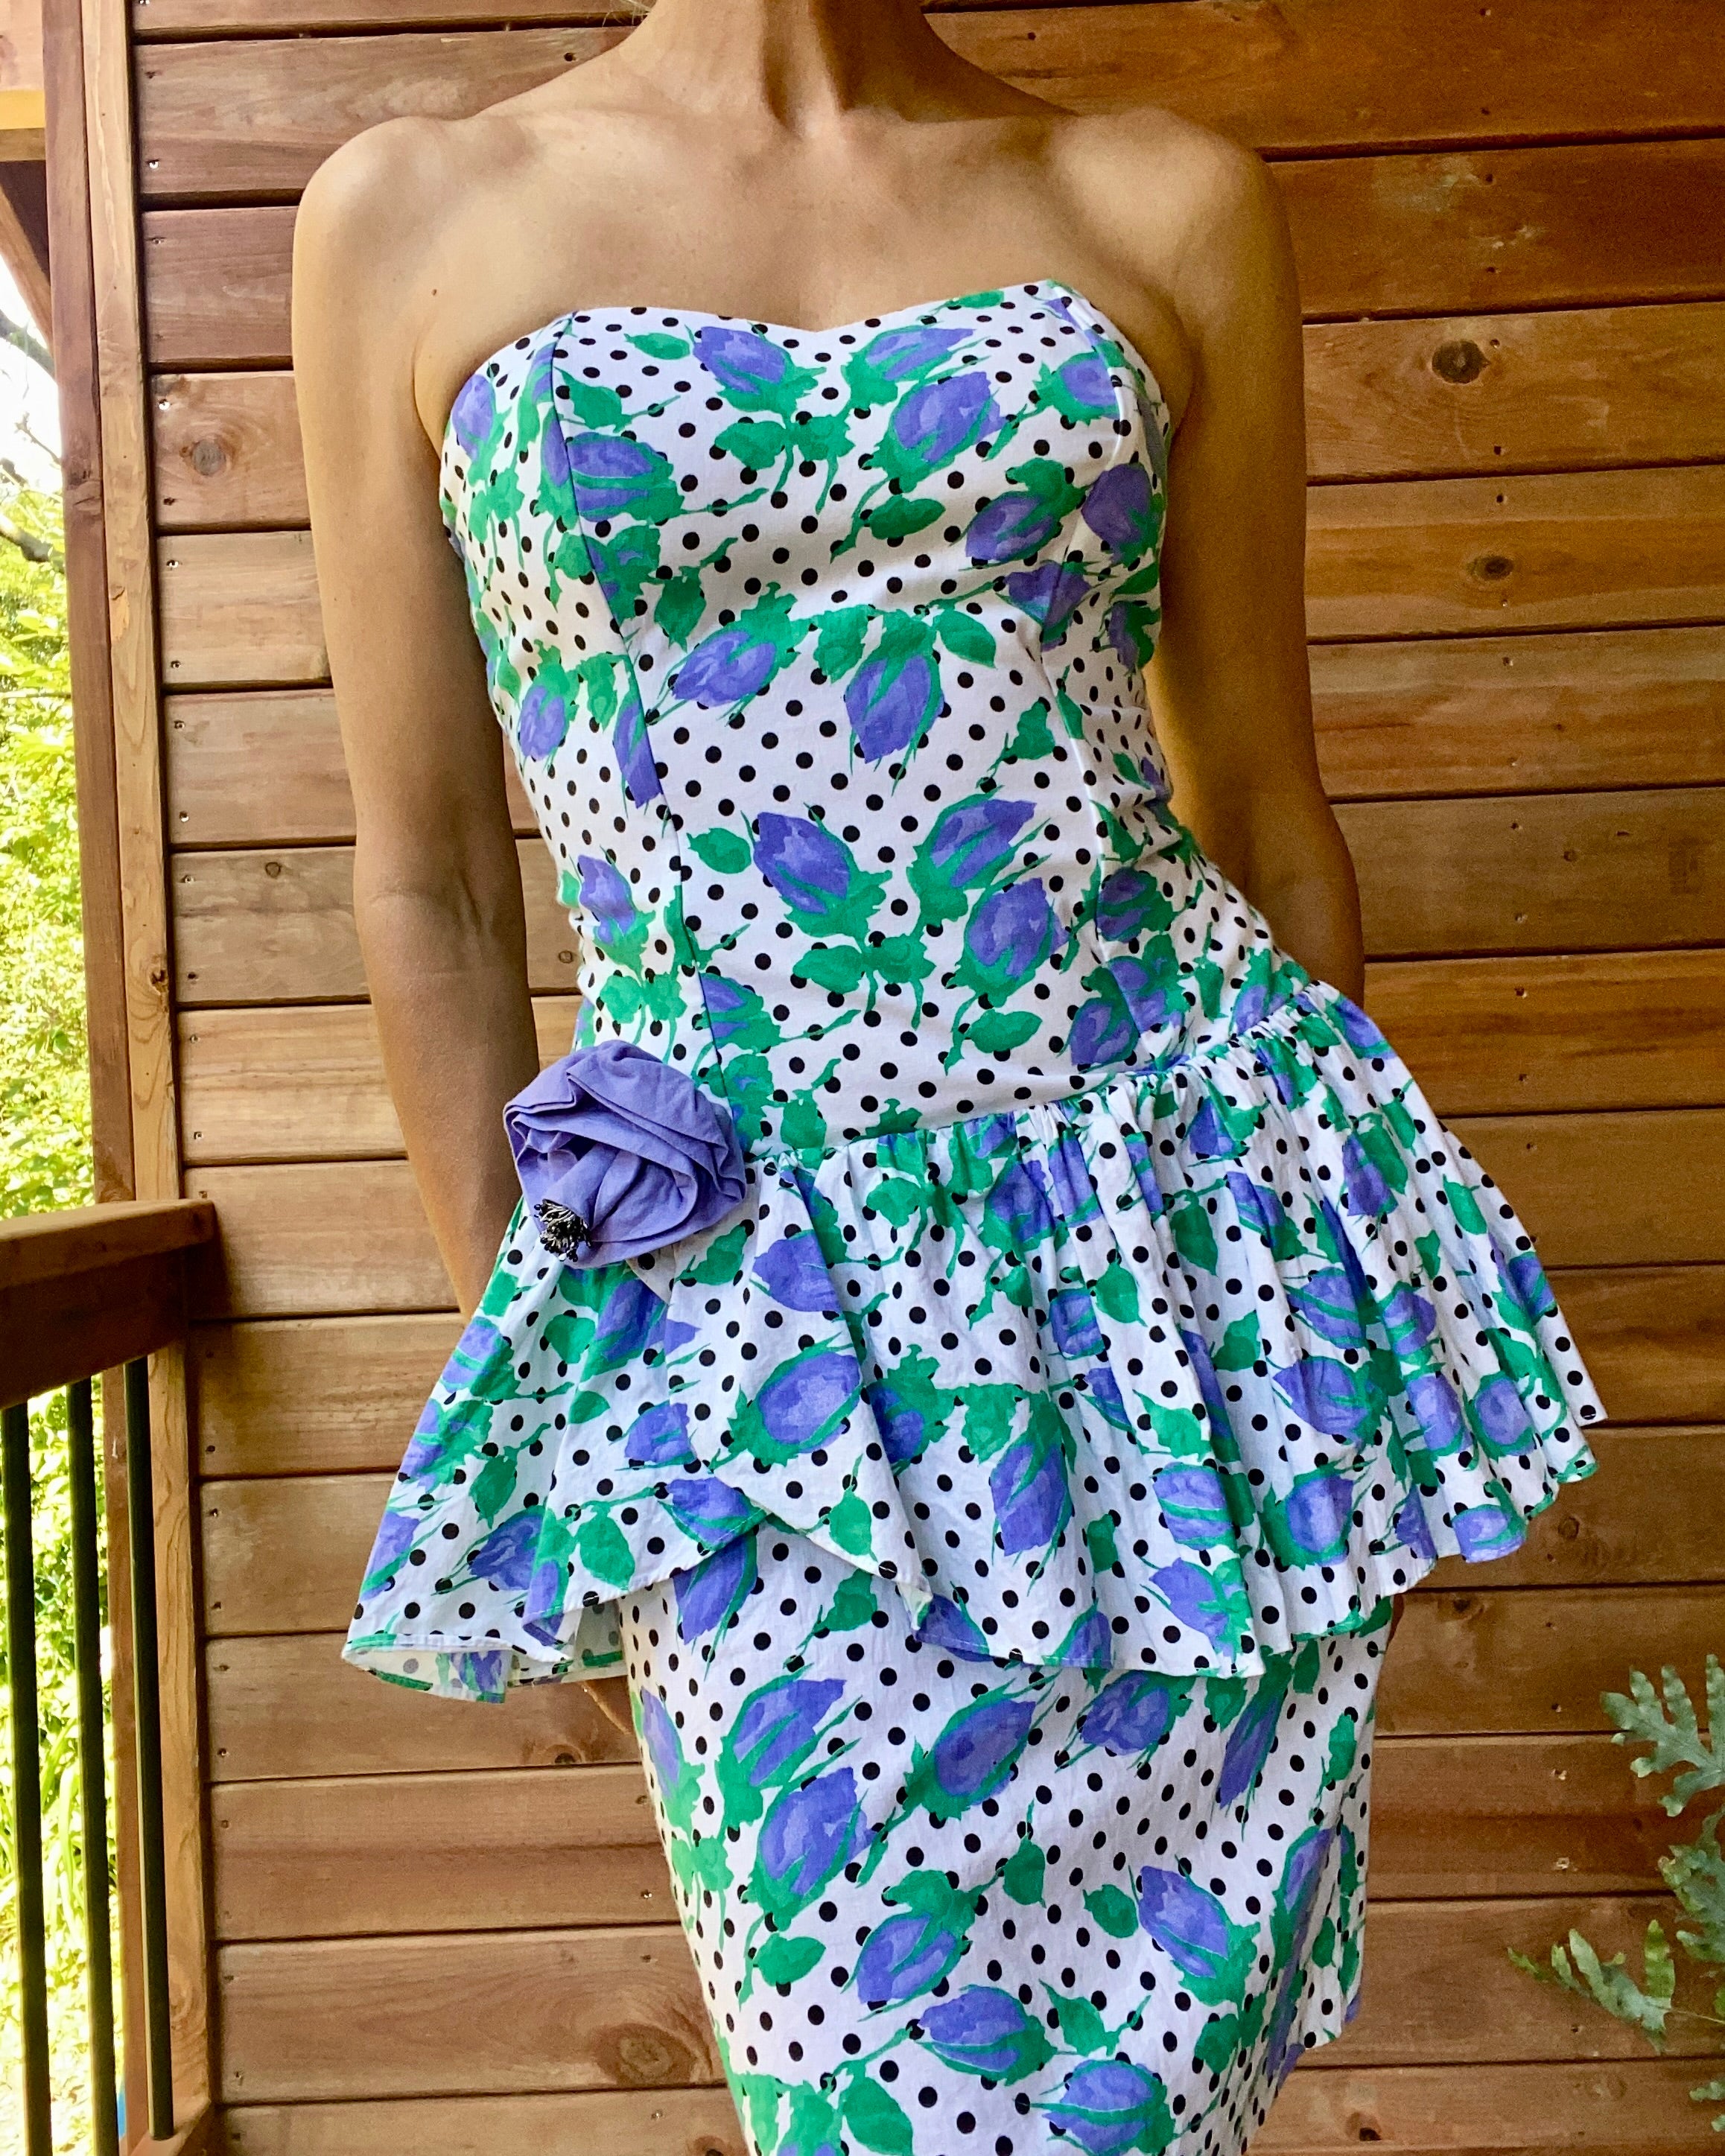 Vintage 1980s Cotton Polka Dot With Purple Rose Print Bustier Dress and Ruffle Peplum - Union Made ILGWU in USA Size M